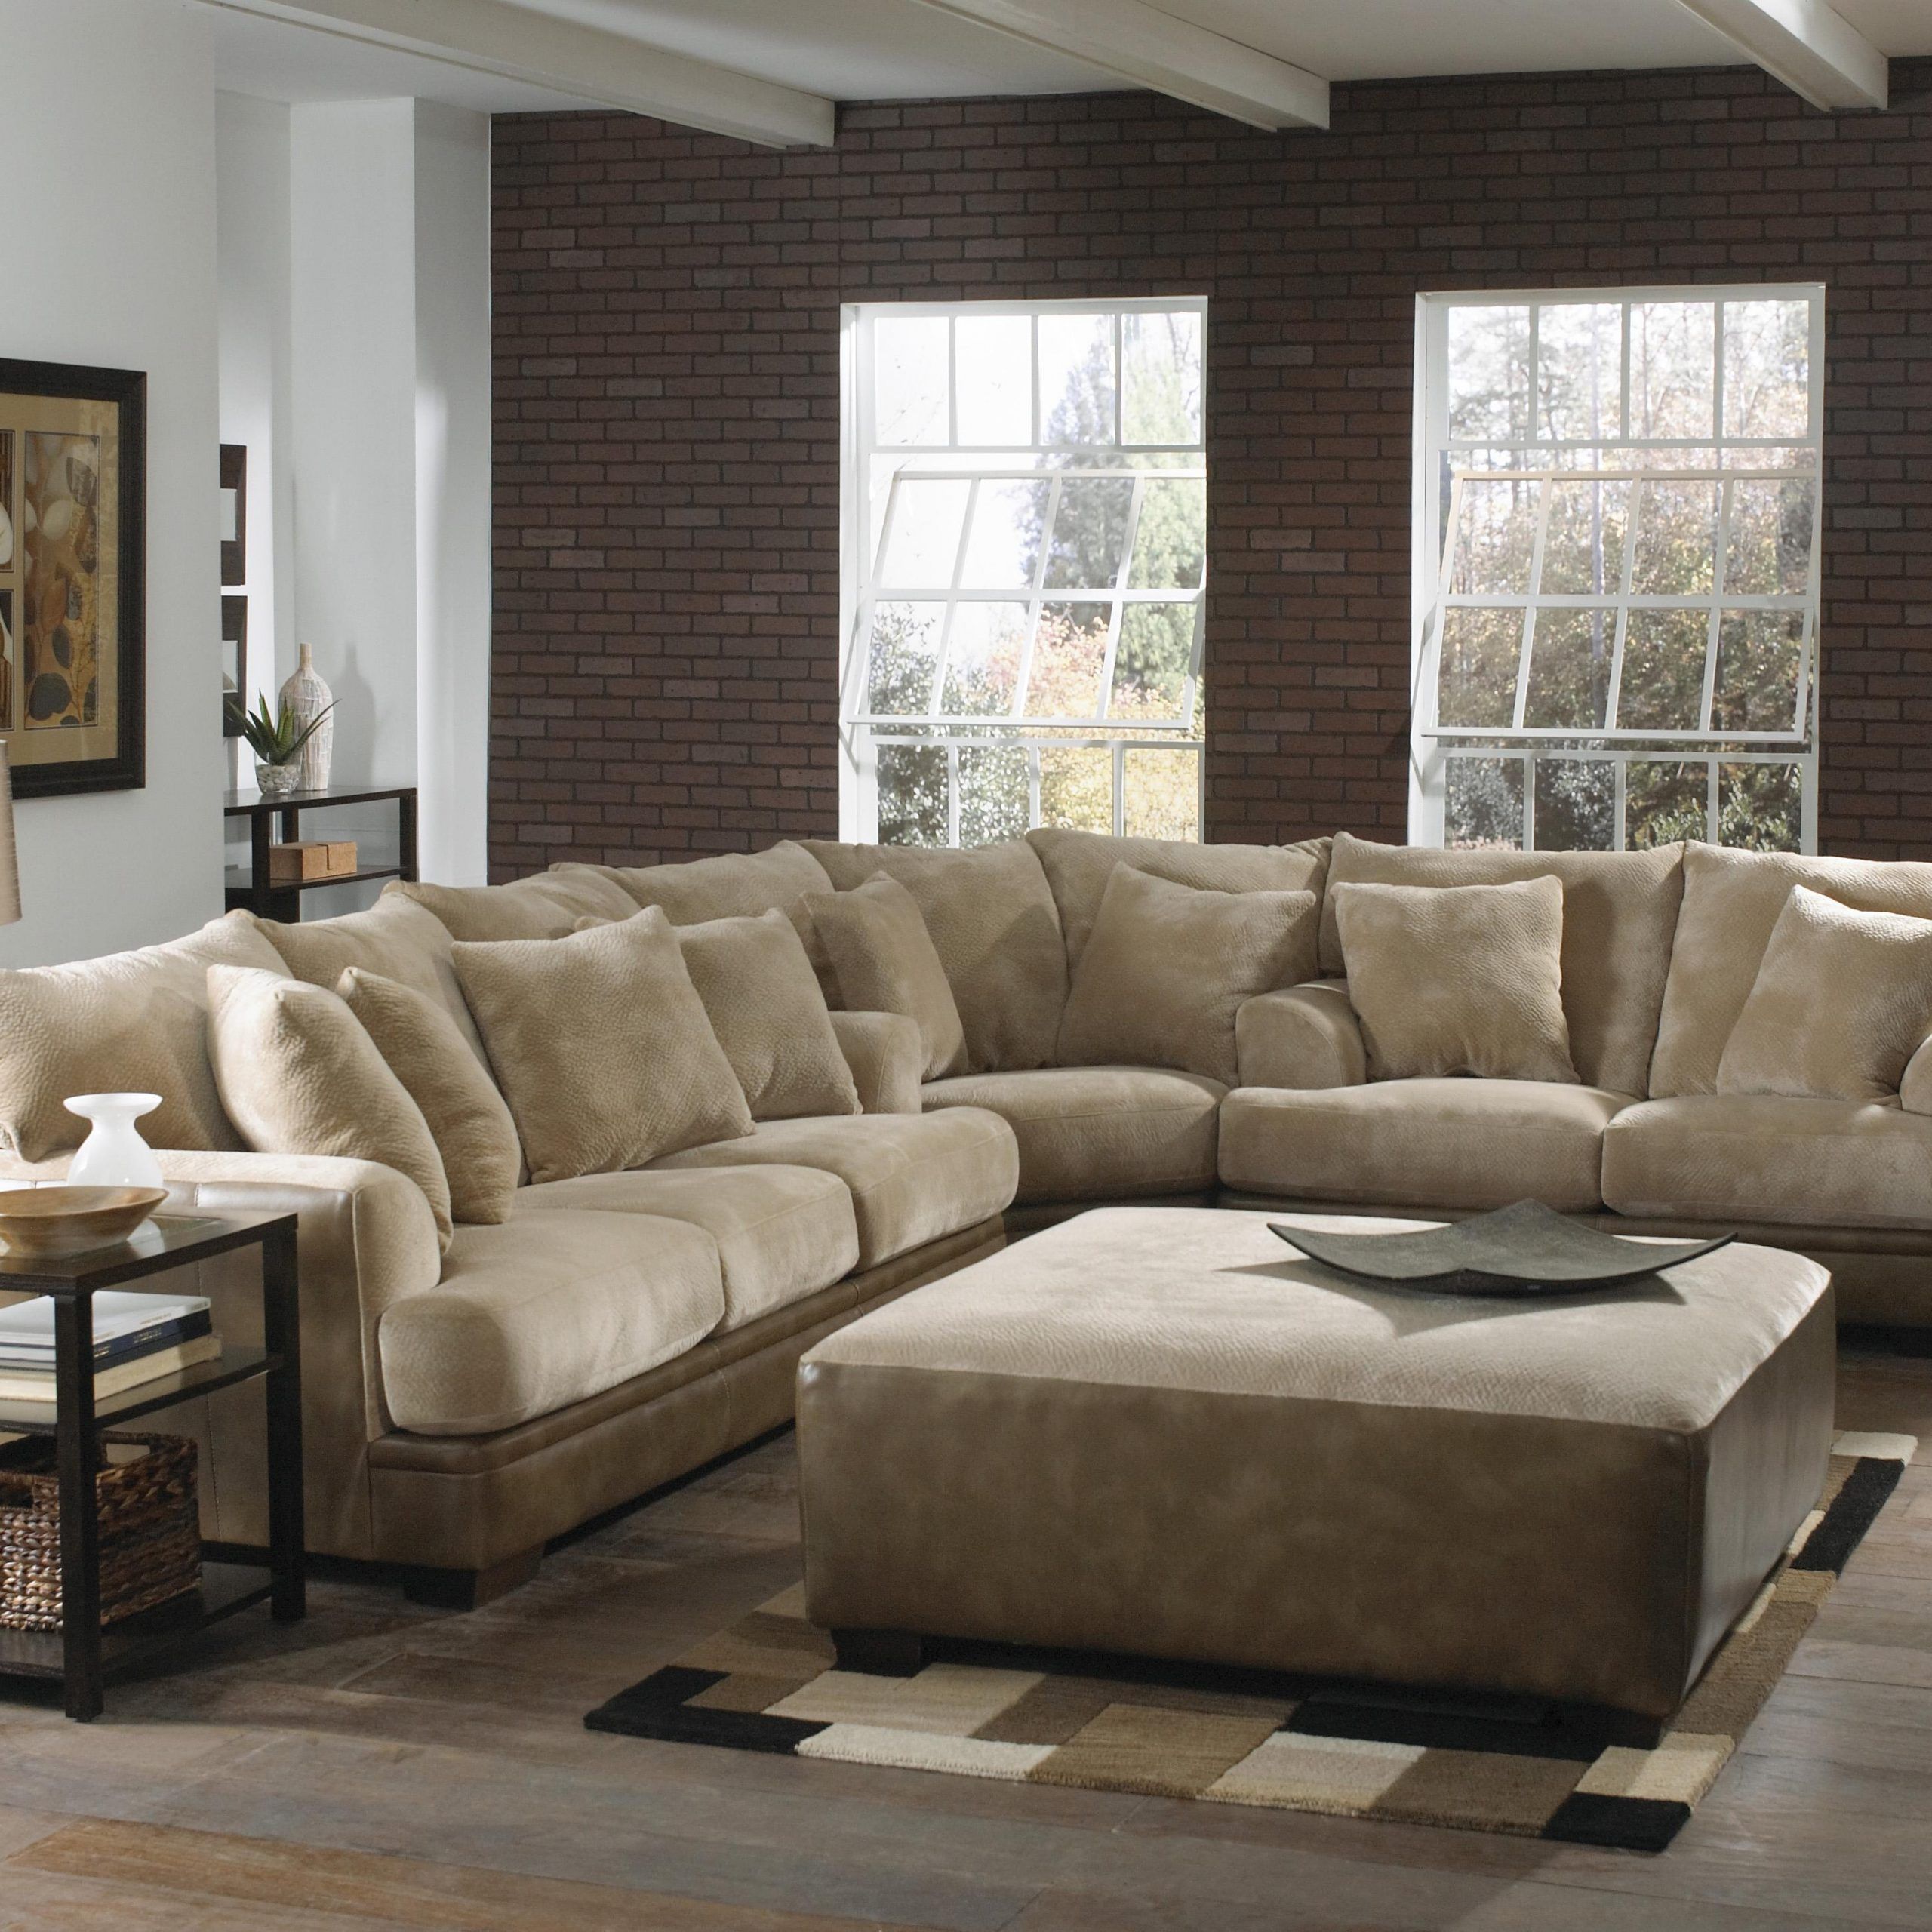 Large L Shaped Sectional Sofa With Left Side Loveseat Throughout Popular Hannah Left Sectional Sofas (View 8 of 25)